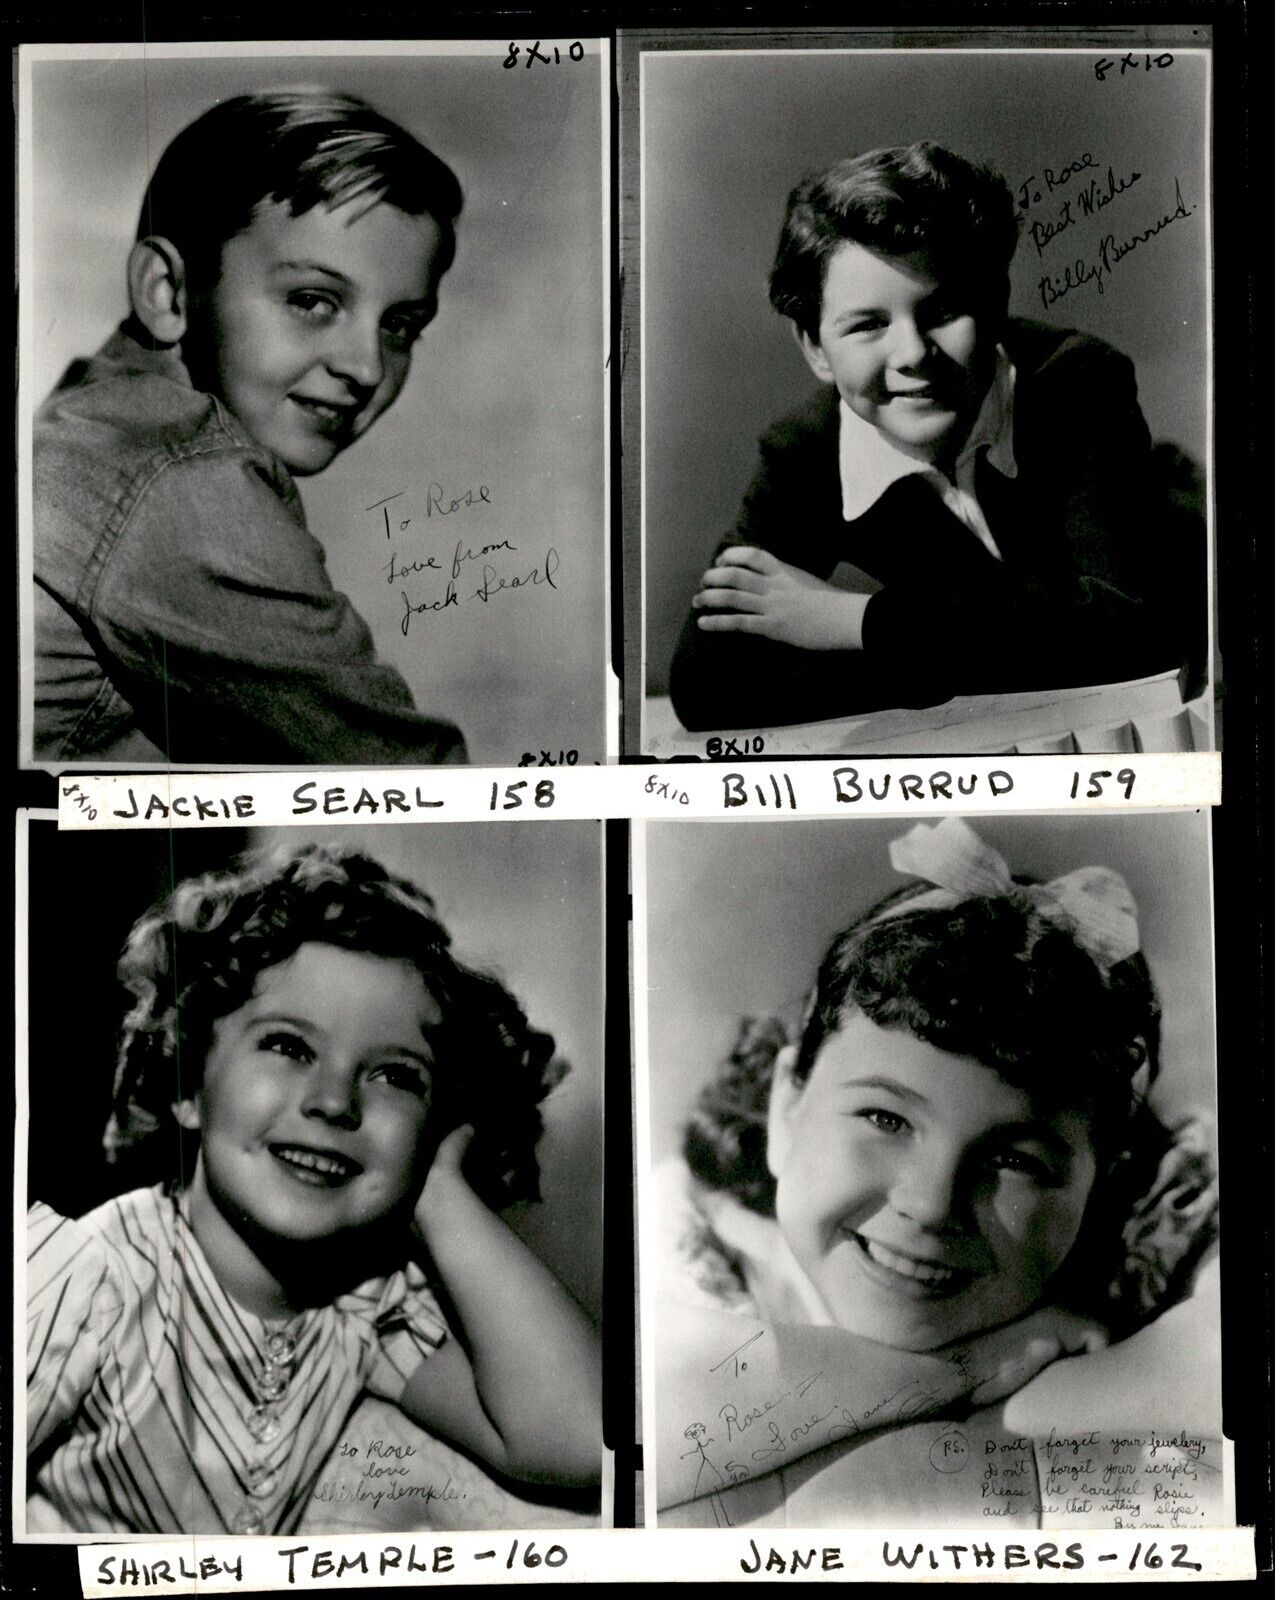 LD328 2nd Gen ContactSheet Photo JACKIE SEARL BILL BURRUD SHIRLEY TEMPLE WITHERS